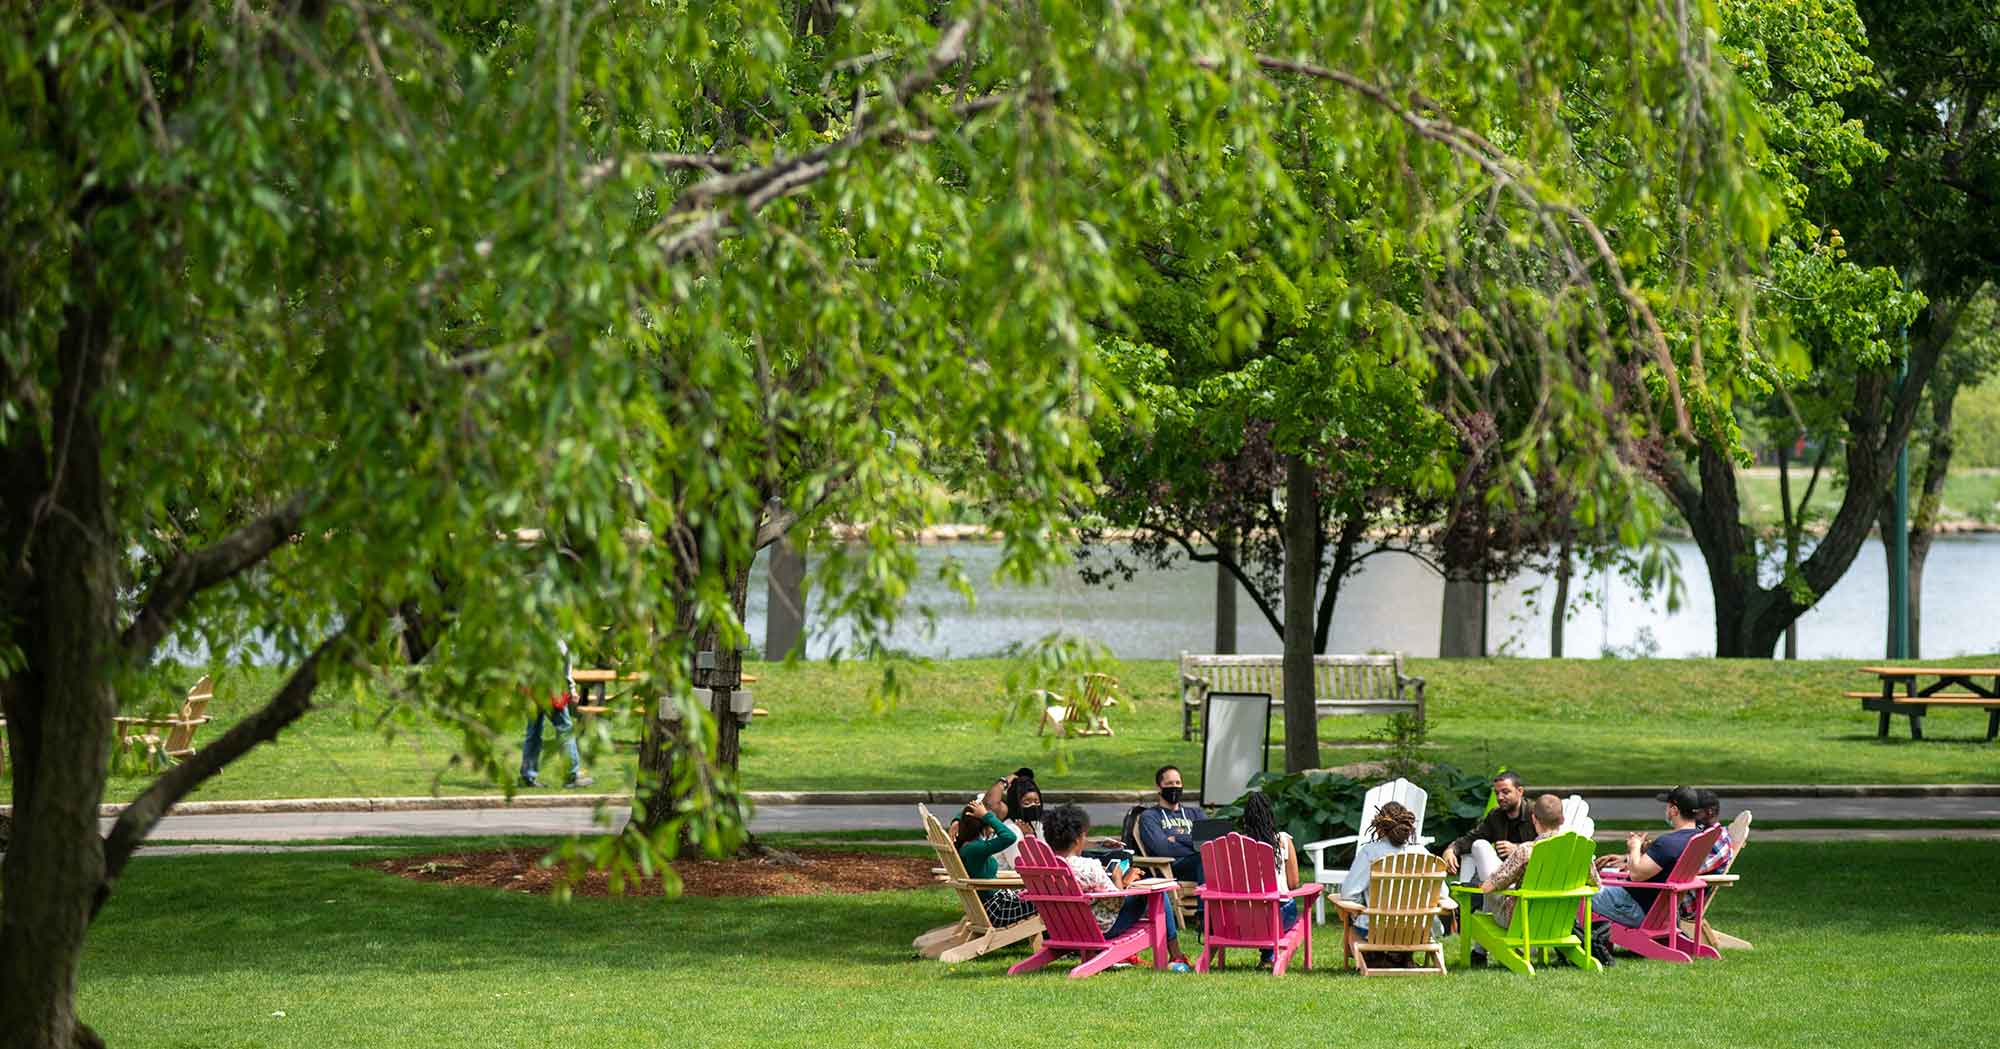 BU in Summer Video Captures a More Mellow Campus BU Today Boston